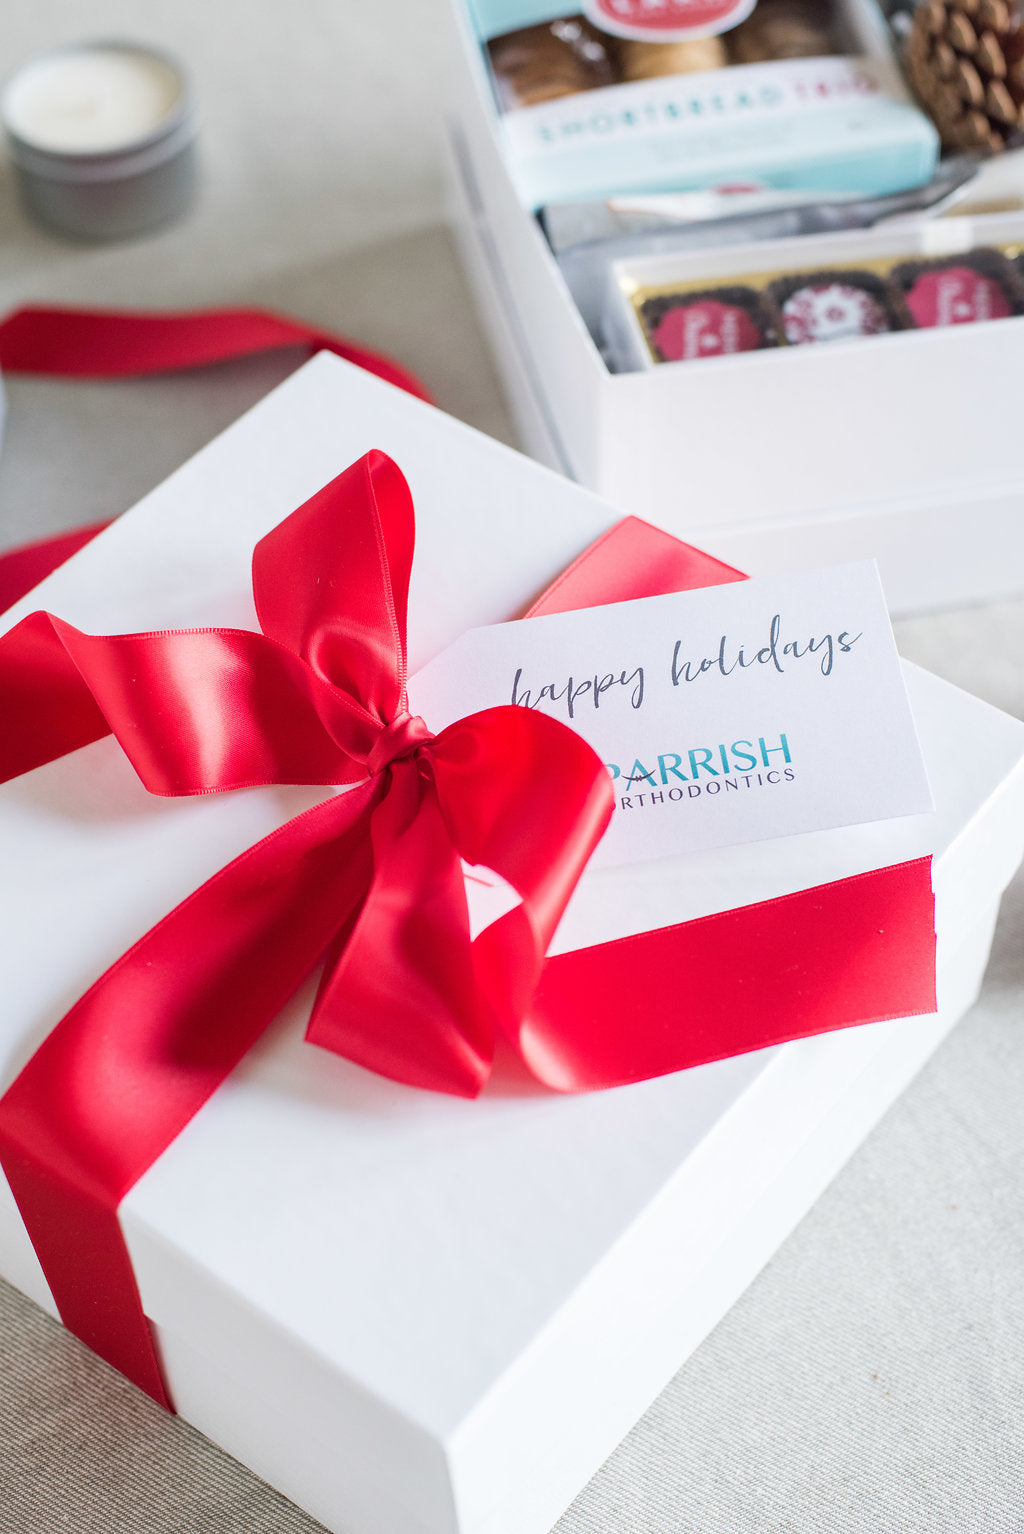 Gallery Custom Holiday Corporate Gifts Boxes for